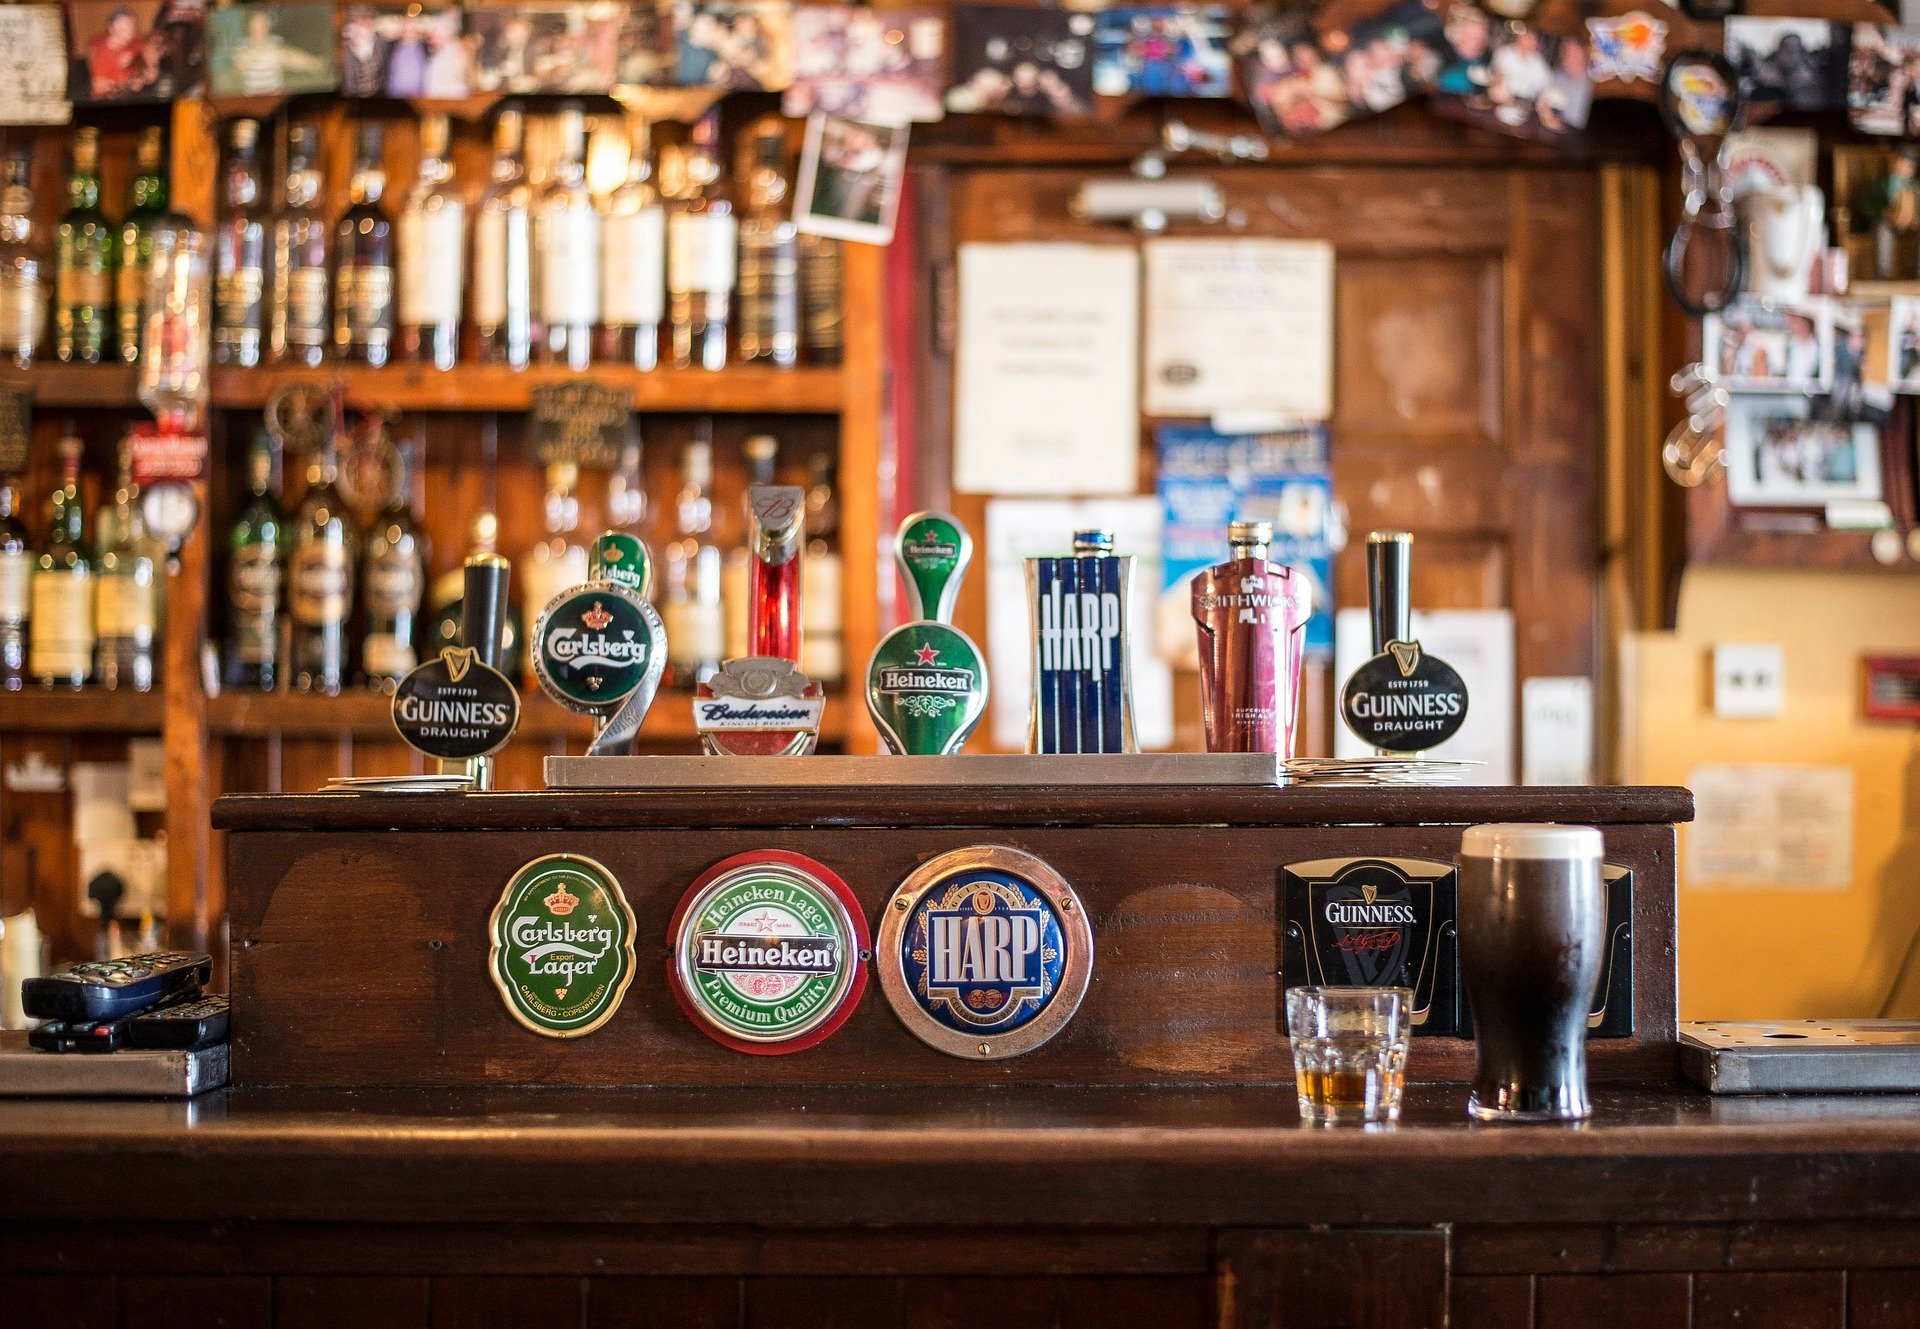 generic image showing some bar beer pumps - local businesses article